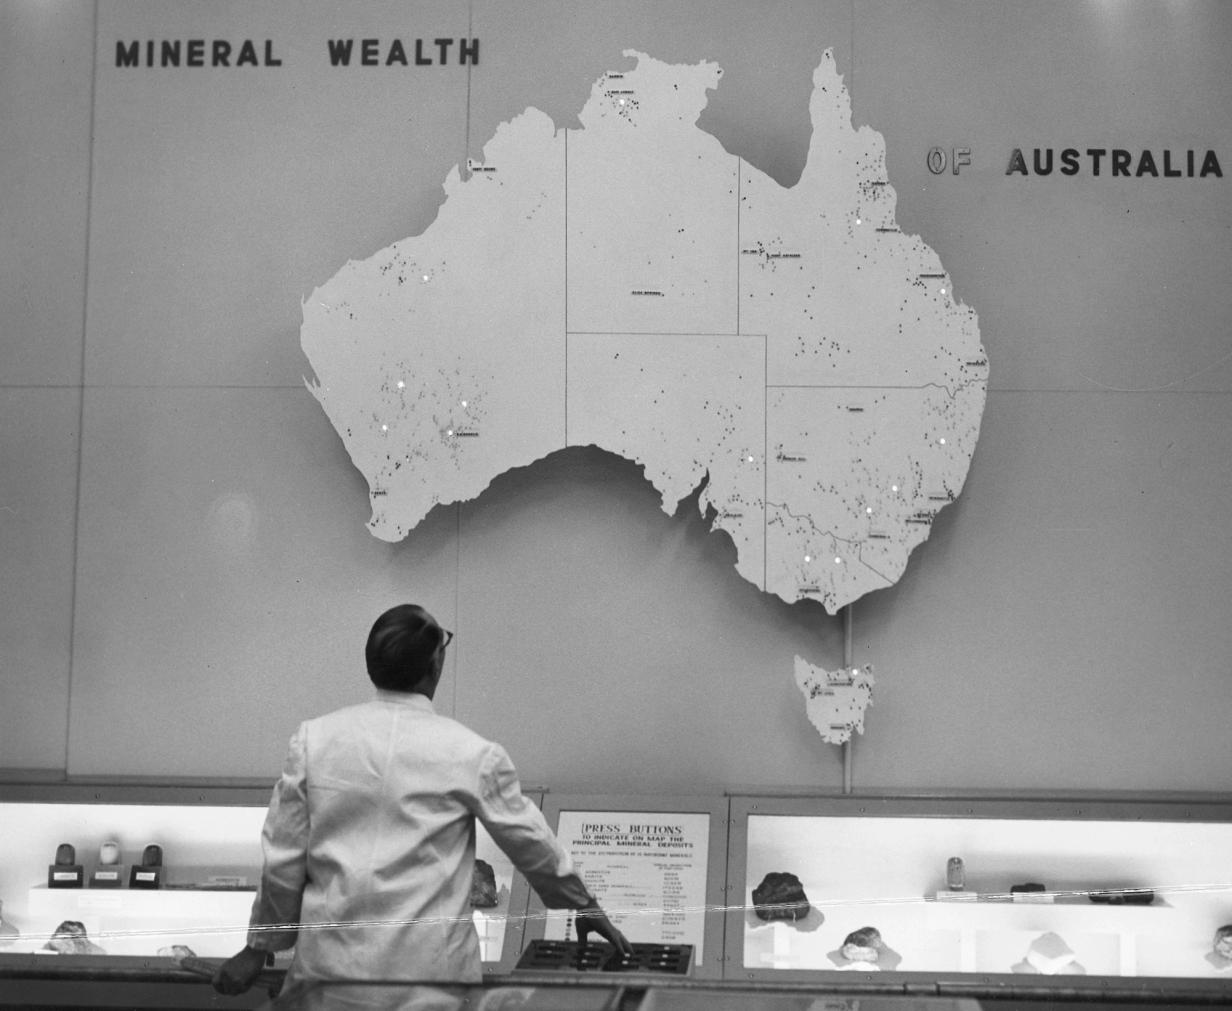 Large interactive map of Australia with operated by a person in a white shirt standing in front of some buttons